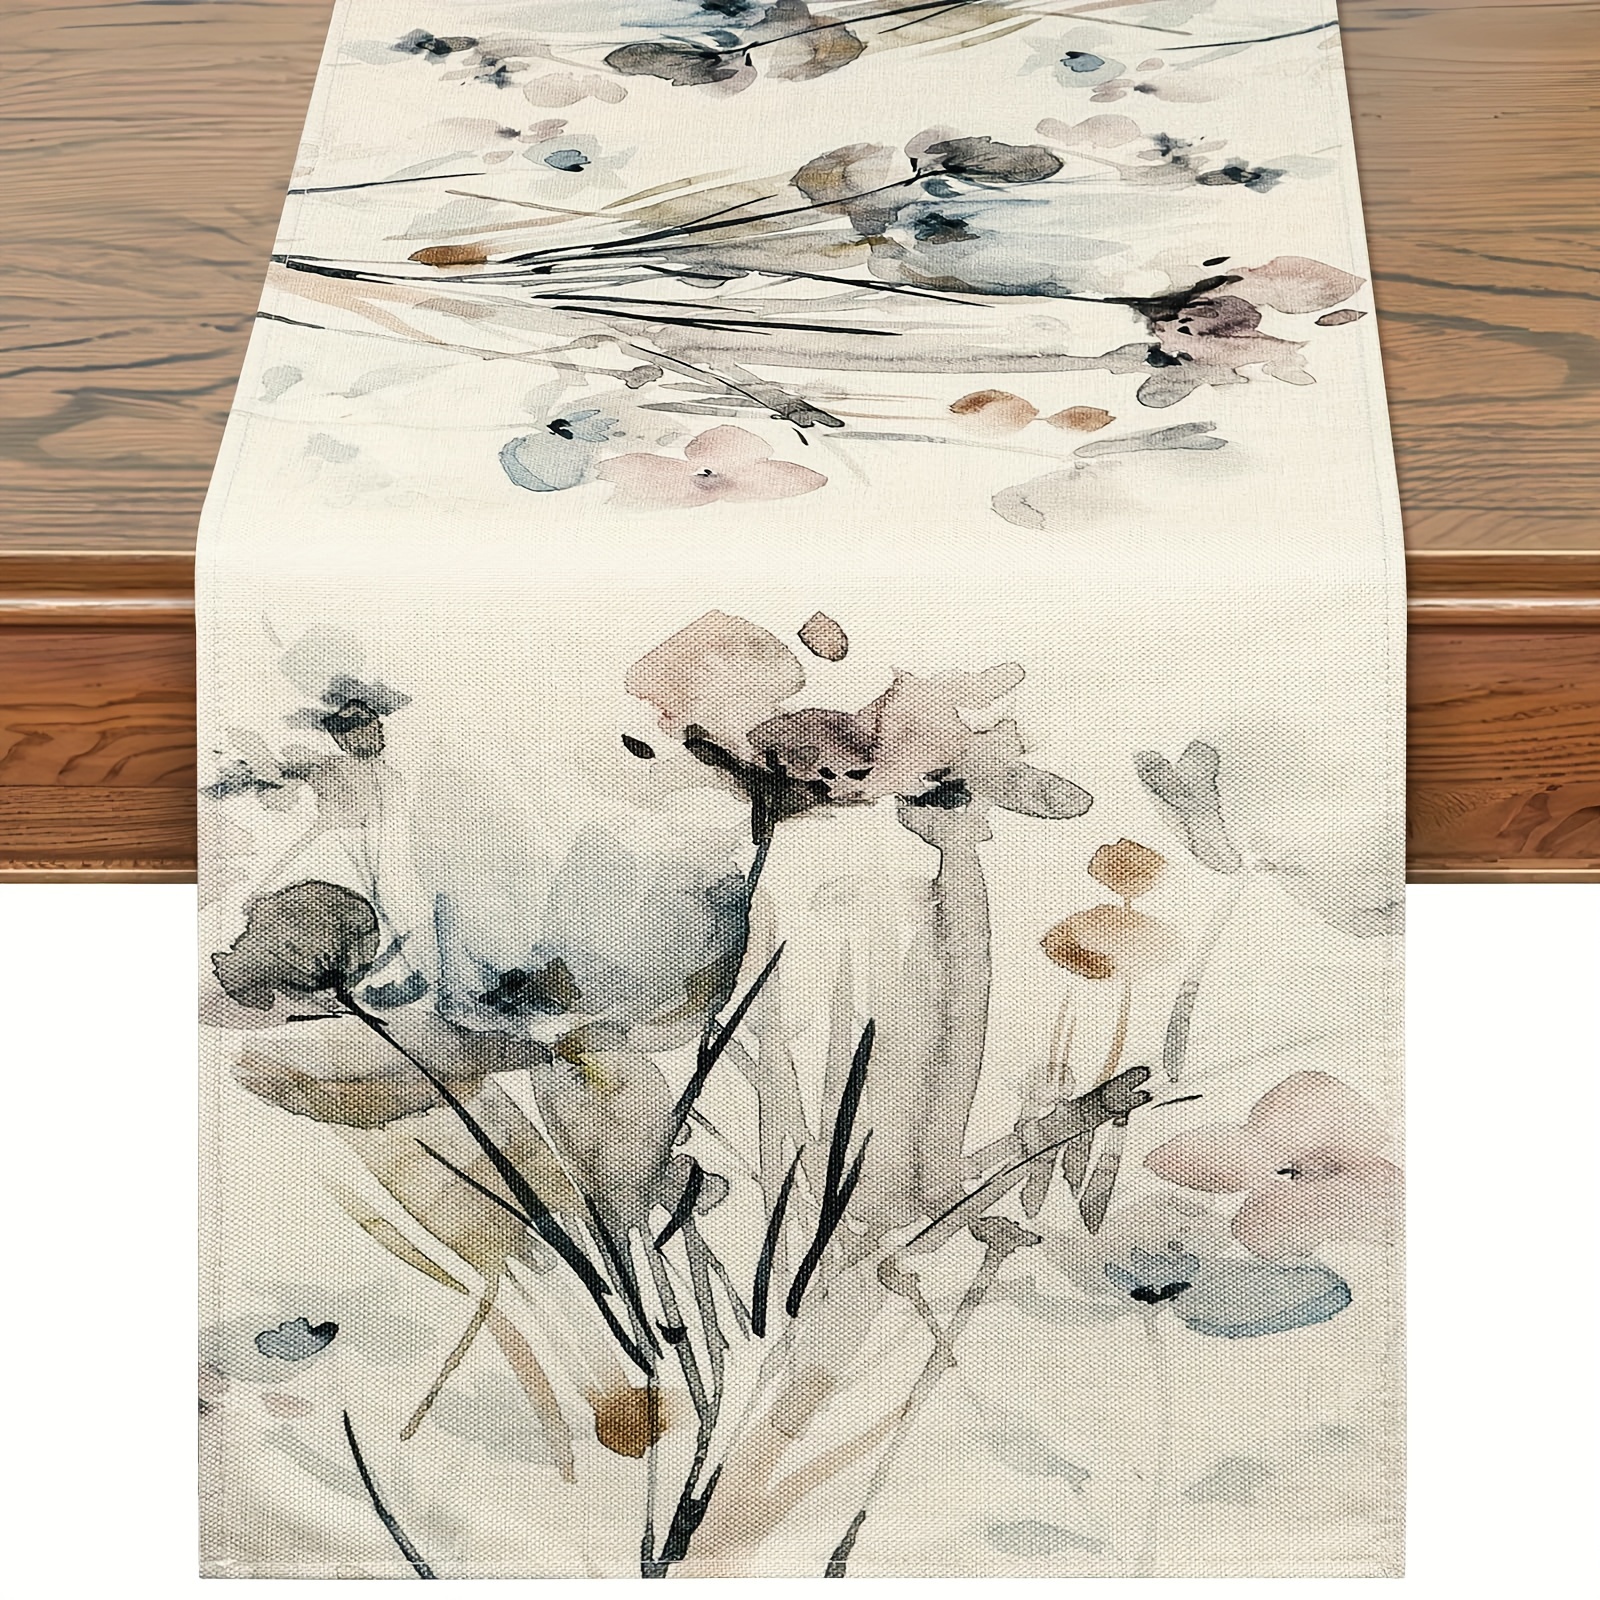 

1pc, Floral Table Runner, Spring Watercolor Flowers Table Runner, Ink Painting Theme Table Runner For Kitchen, Dining Table Decor, Spring Decoration For Coffee Table